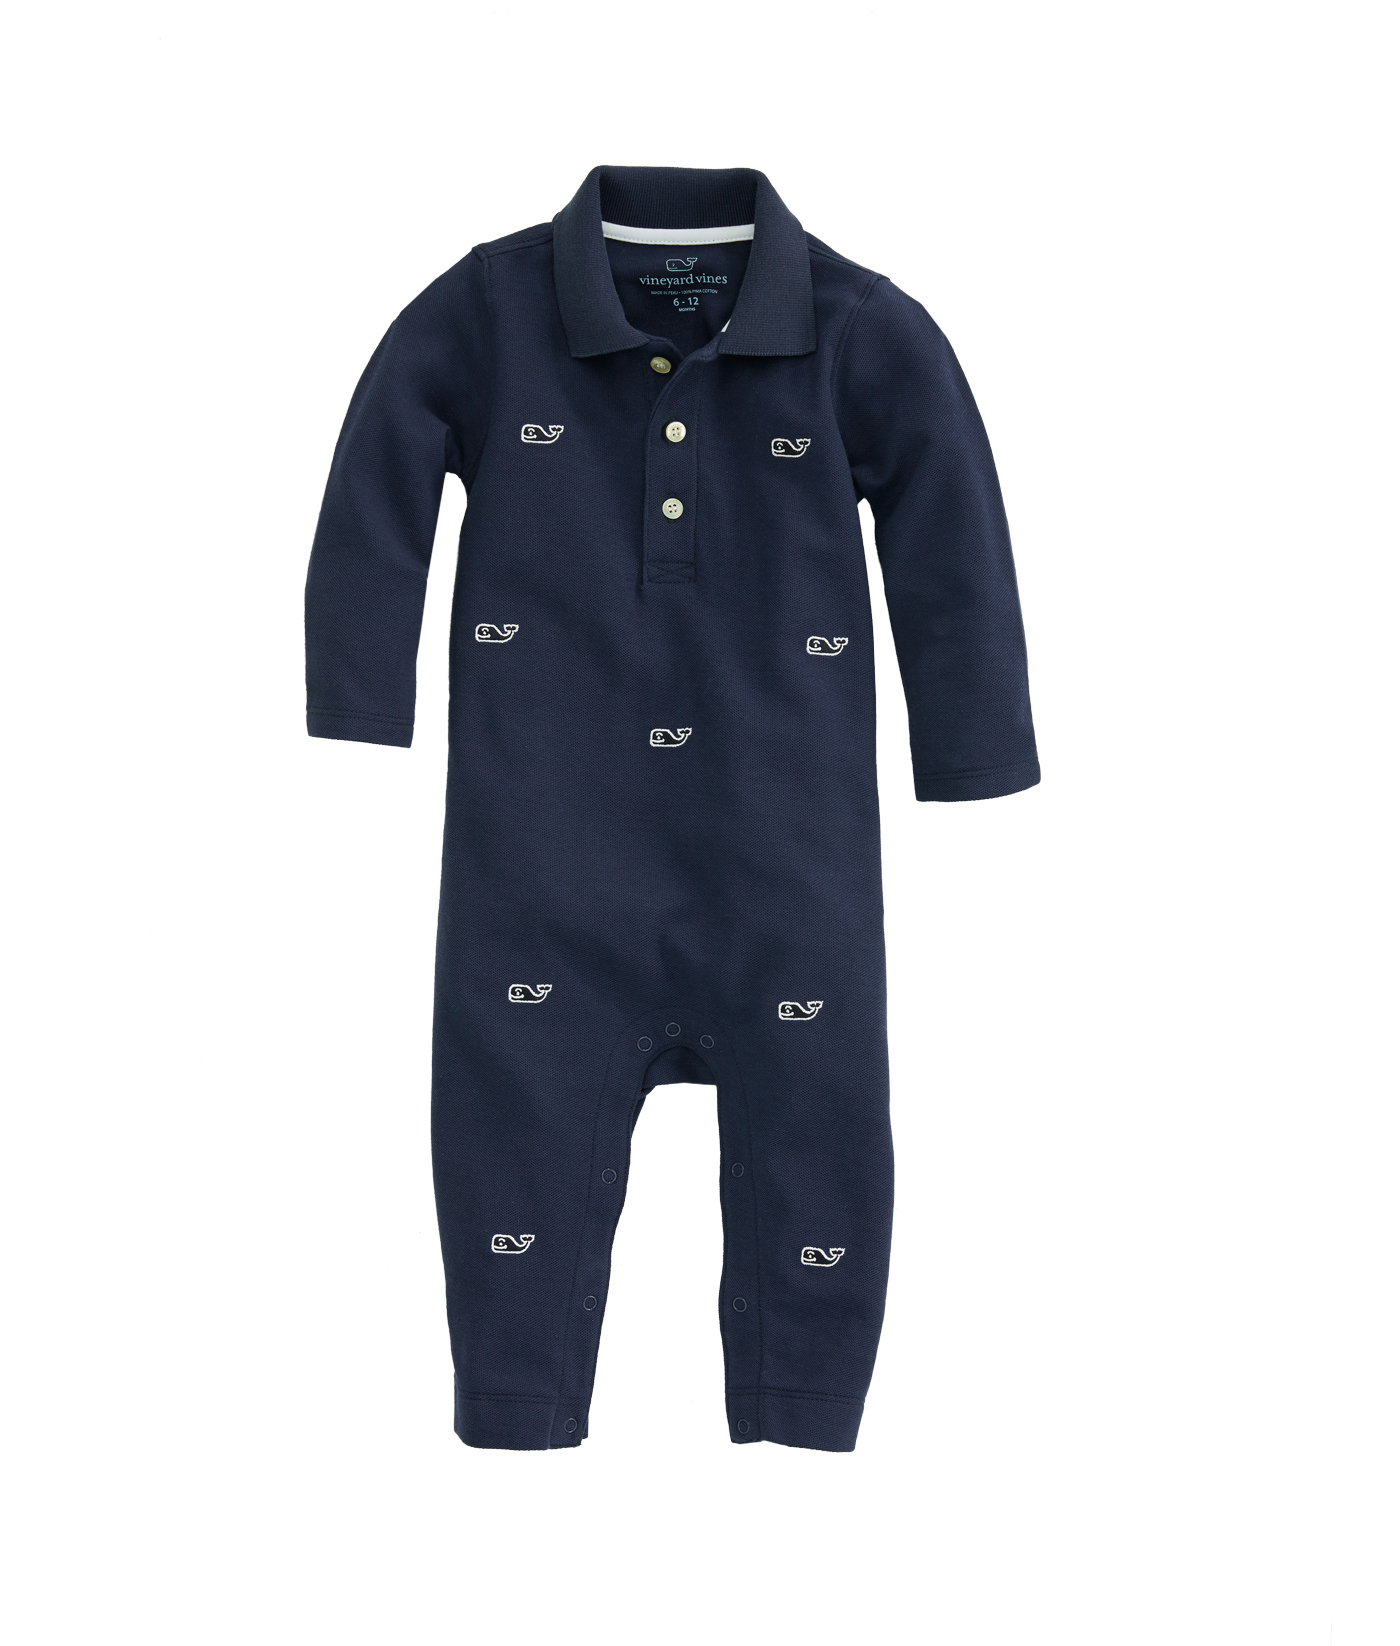 Shop Baby Boy Whale Embroidered Coverall at vineyard vines